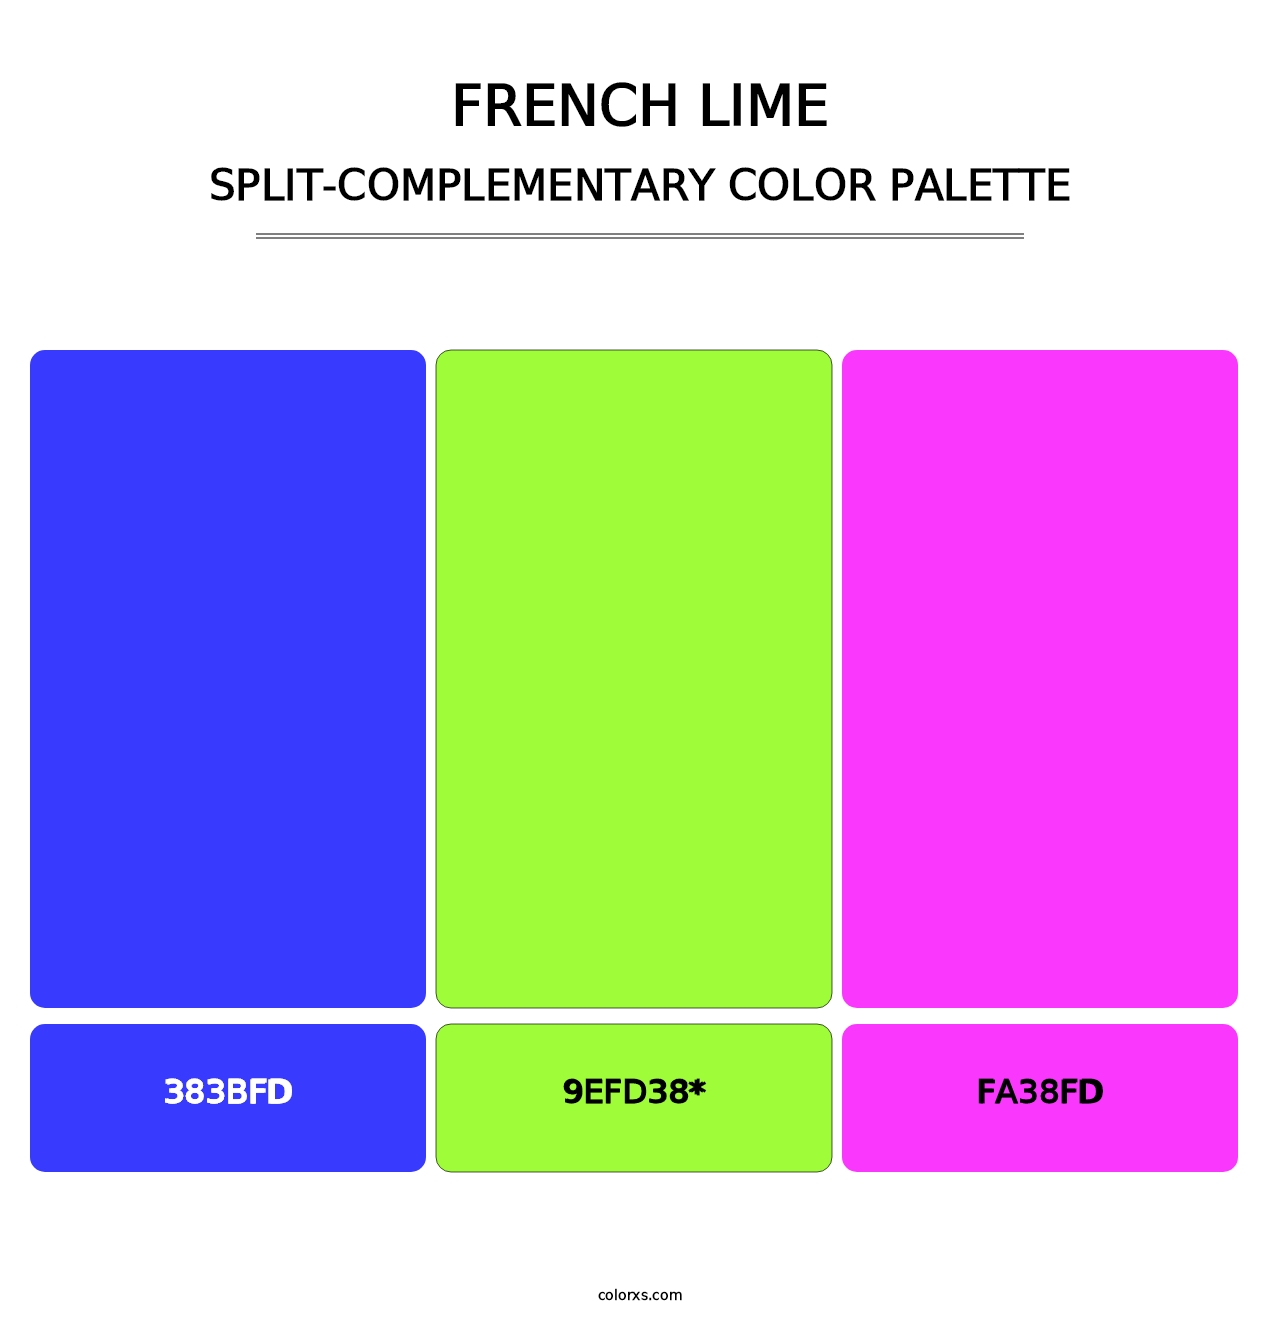 French Lime - Split-Complementary Color Palette